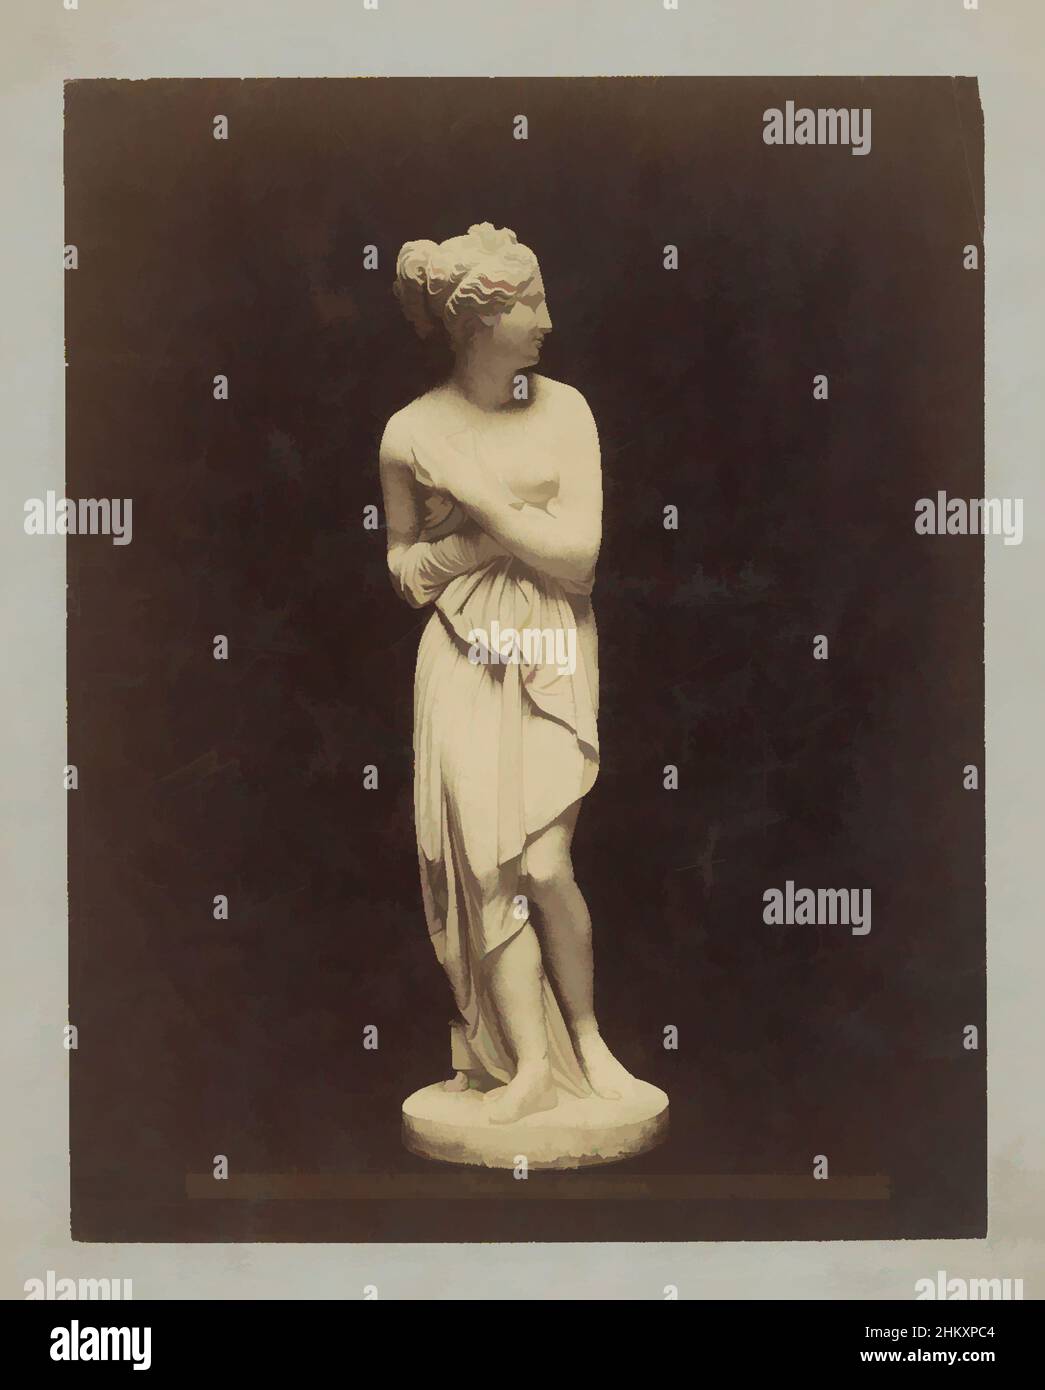 Art inspired by Image of Venus, Venus, Schule des Ant. Canova., c. 1875 - c. 1900, cardboard, albumen print, height 253 mm × width 201 mm, Classic works modernized by Artotop with a splash of modernity. Shapes, color and value, eye-catching visual impact on art. Emotions through freedom of artworks in a contemporary way. A timeless message pursuing a wildly creative new direction. Artists turning to the digital medium and creating the Artotop NFT Stock Photo